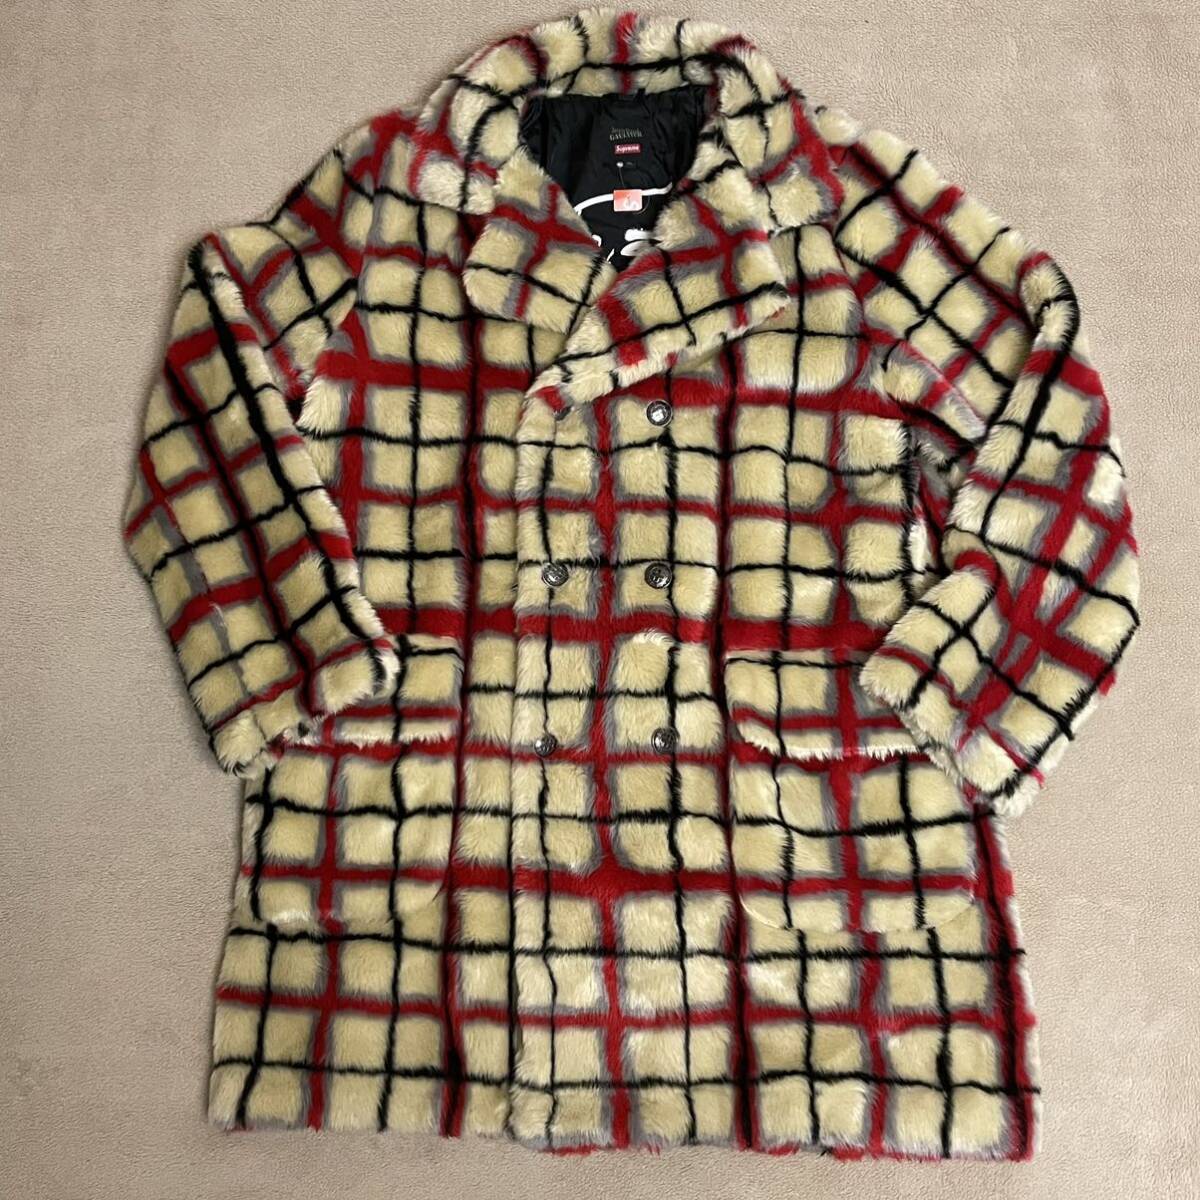 【Supreme Jean Paul Gaultier】Double Breasted Plaid Faux Fur Coat シュプリーム ジャンポールゴルチエ チェック フェイクファーコート